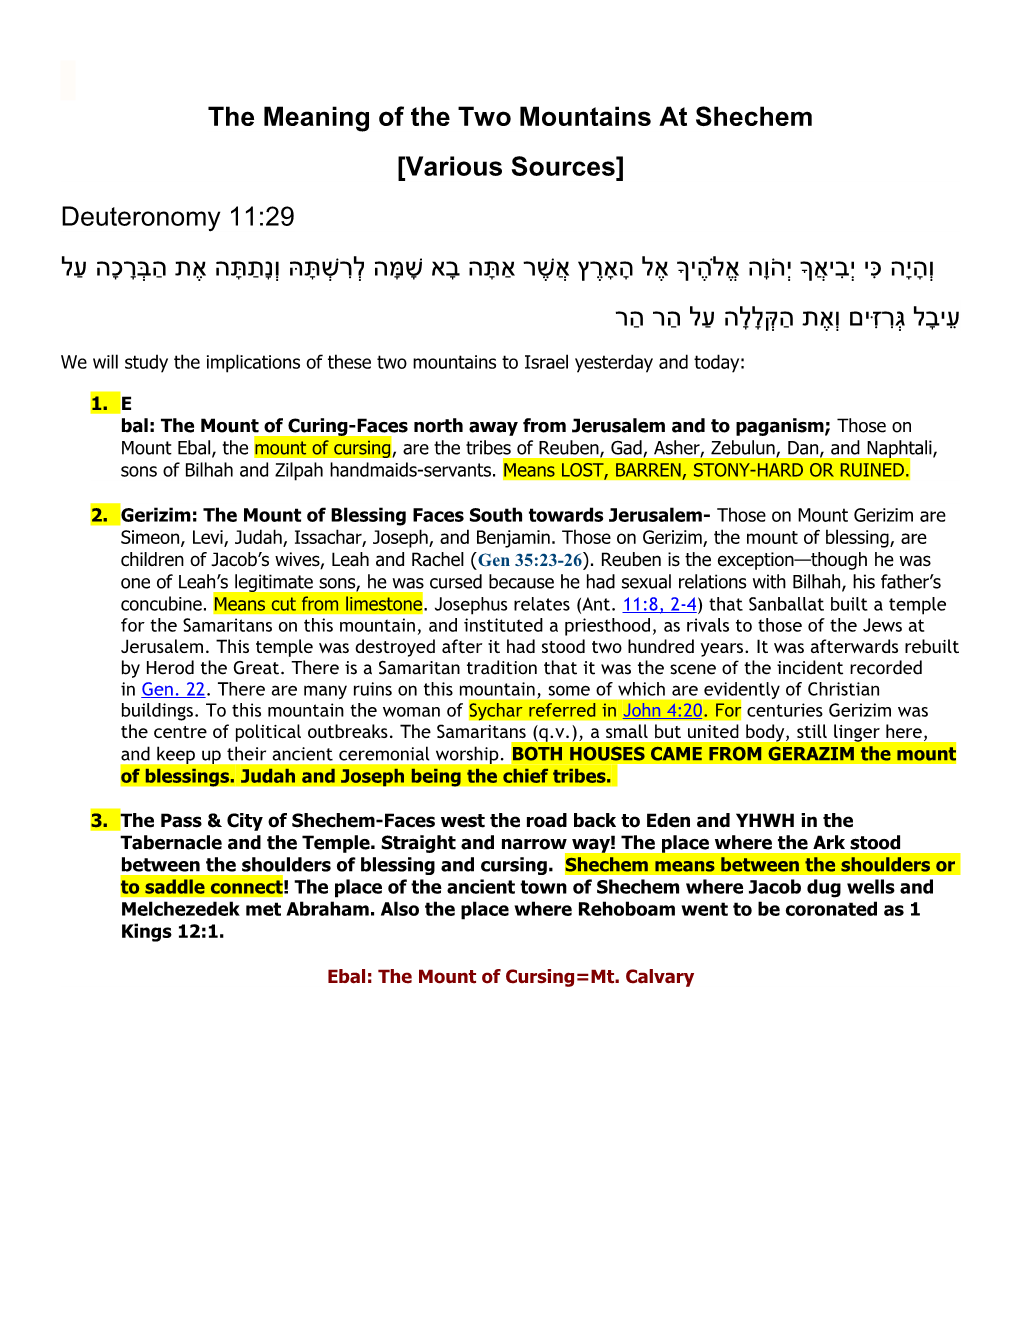 The Meaning of the Two Mountains at Shechem